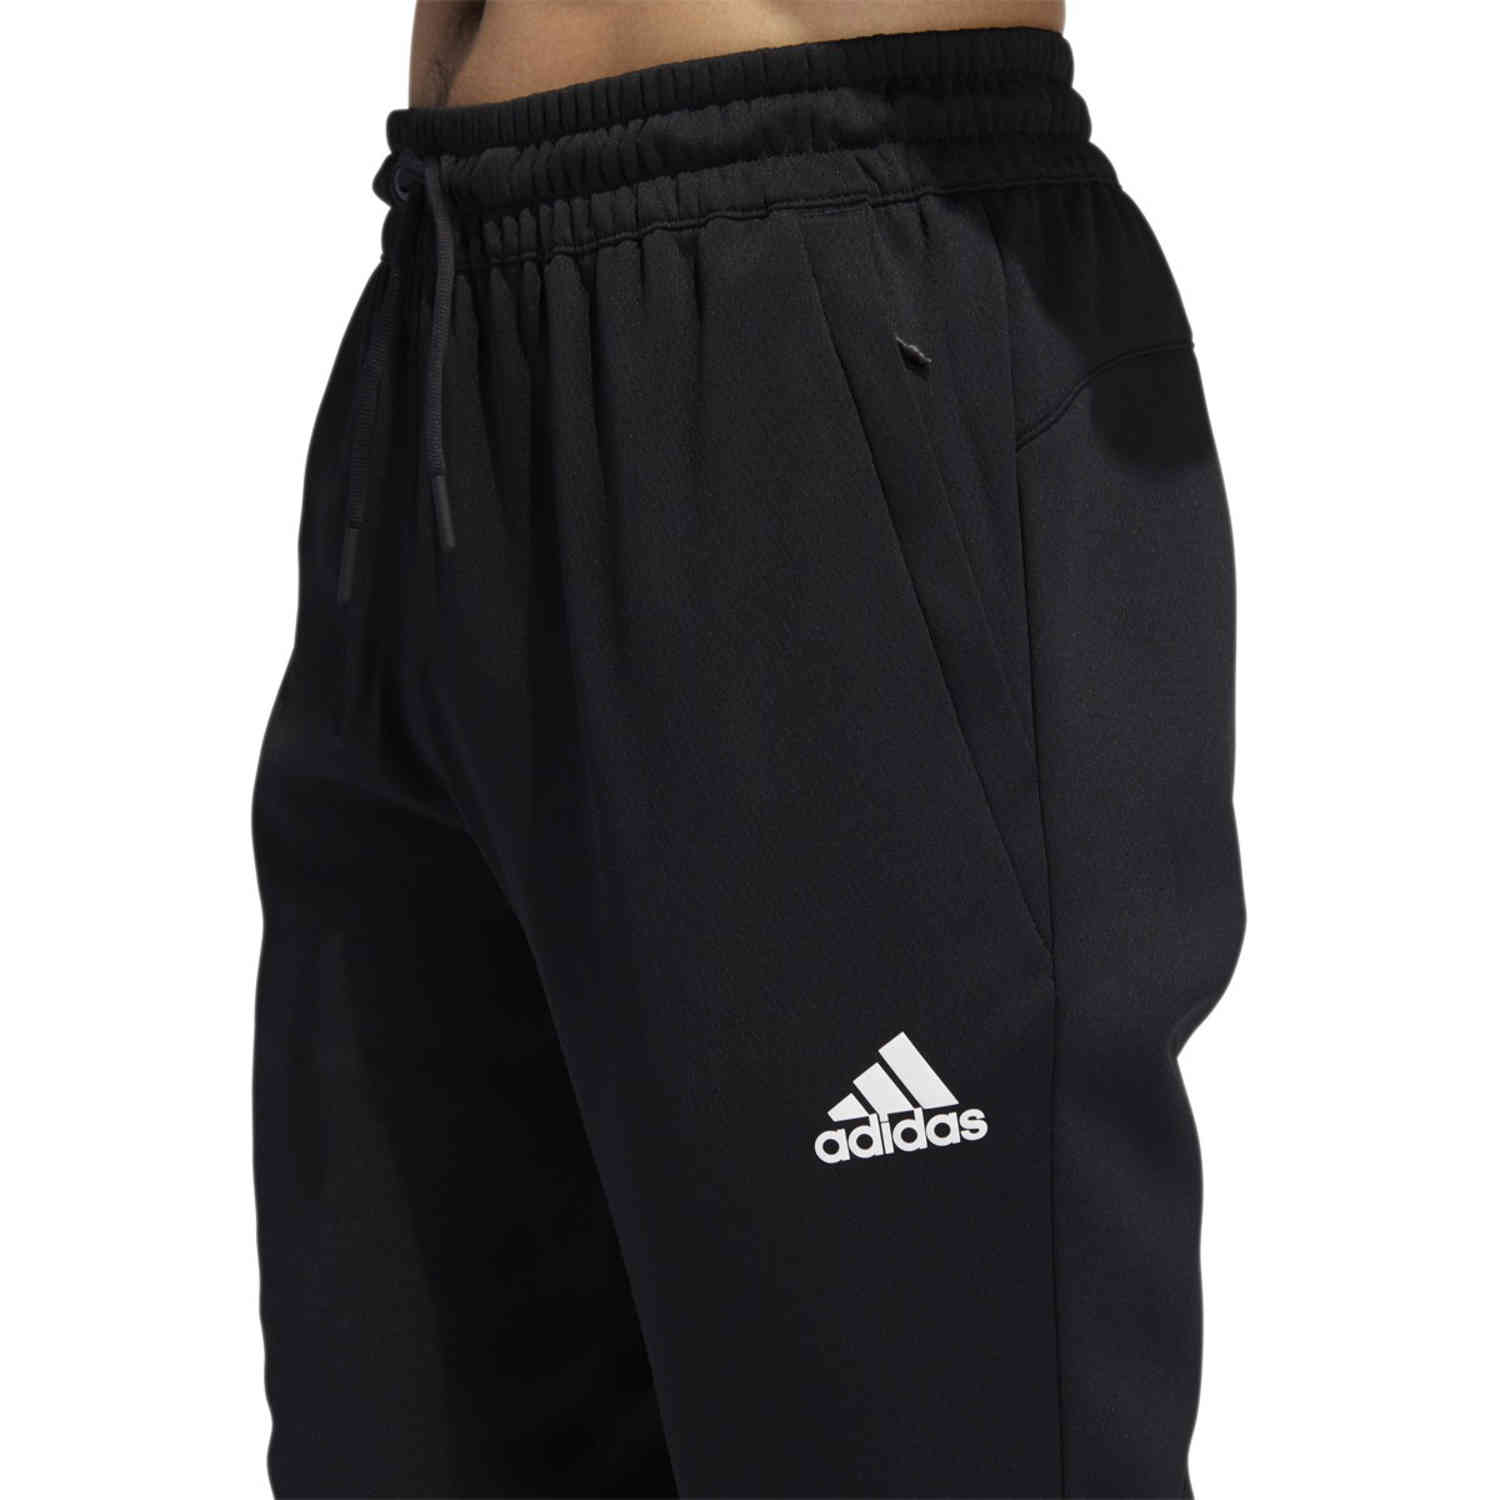 adidas Team Issue Lifestyle Tapered Pants - Black/white - SoccerPro